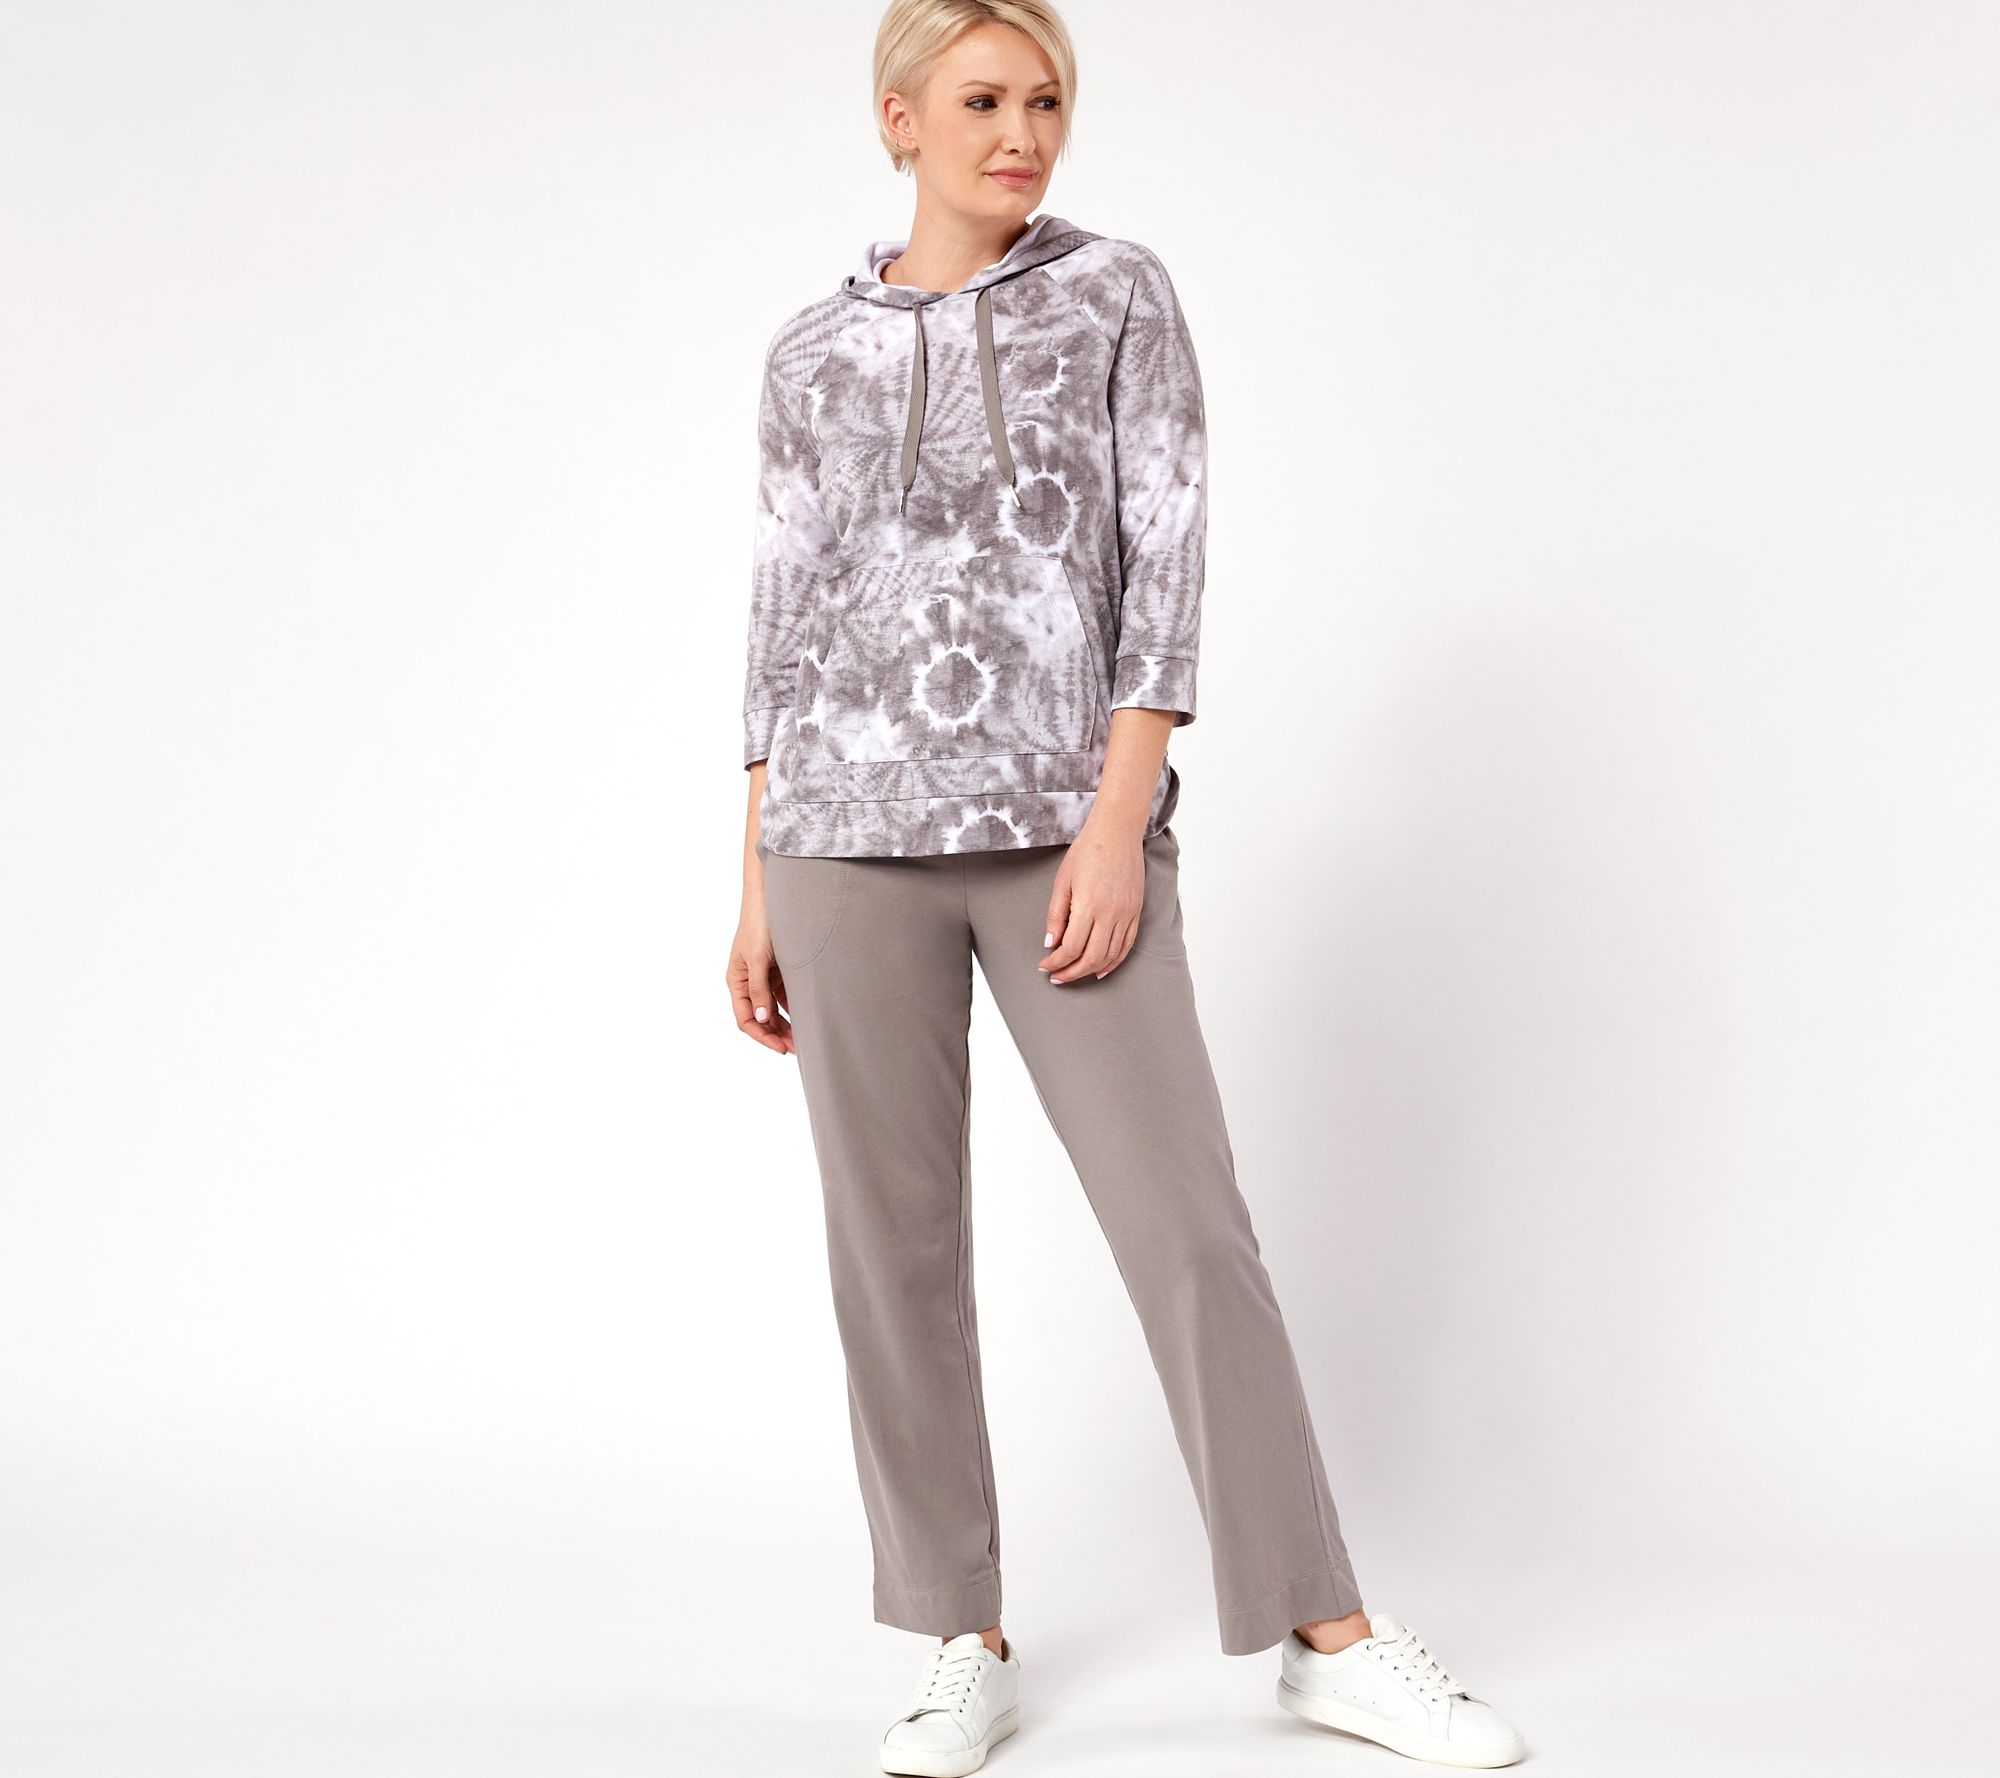 Koolaburra by UGG - Koolaburra kicks off Fall with a new loungewear  collection available only @kohls & @qvc. In favorable Fall neutrals, our  lounge set features a comfy brushed back Sherpa hoodie